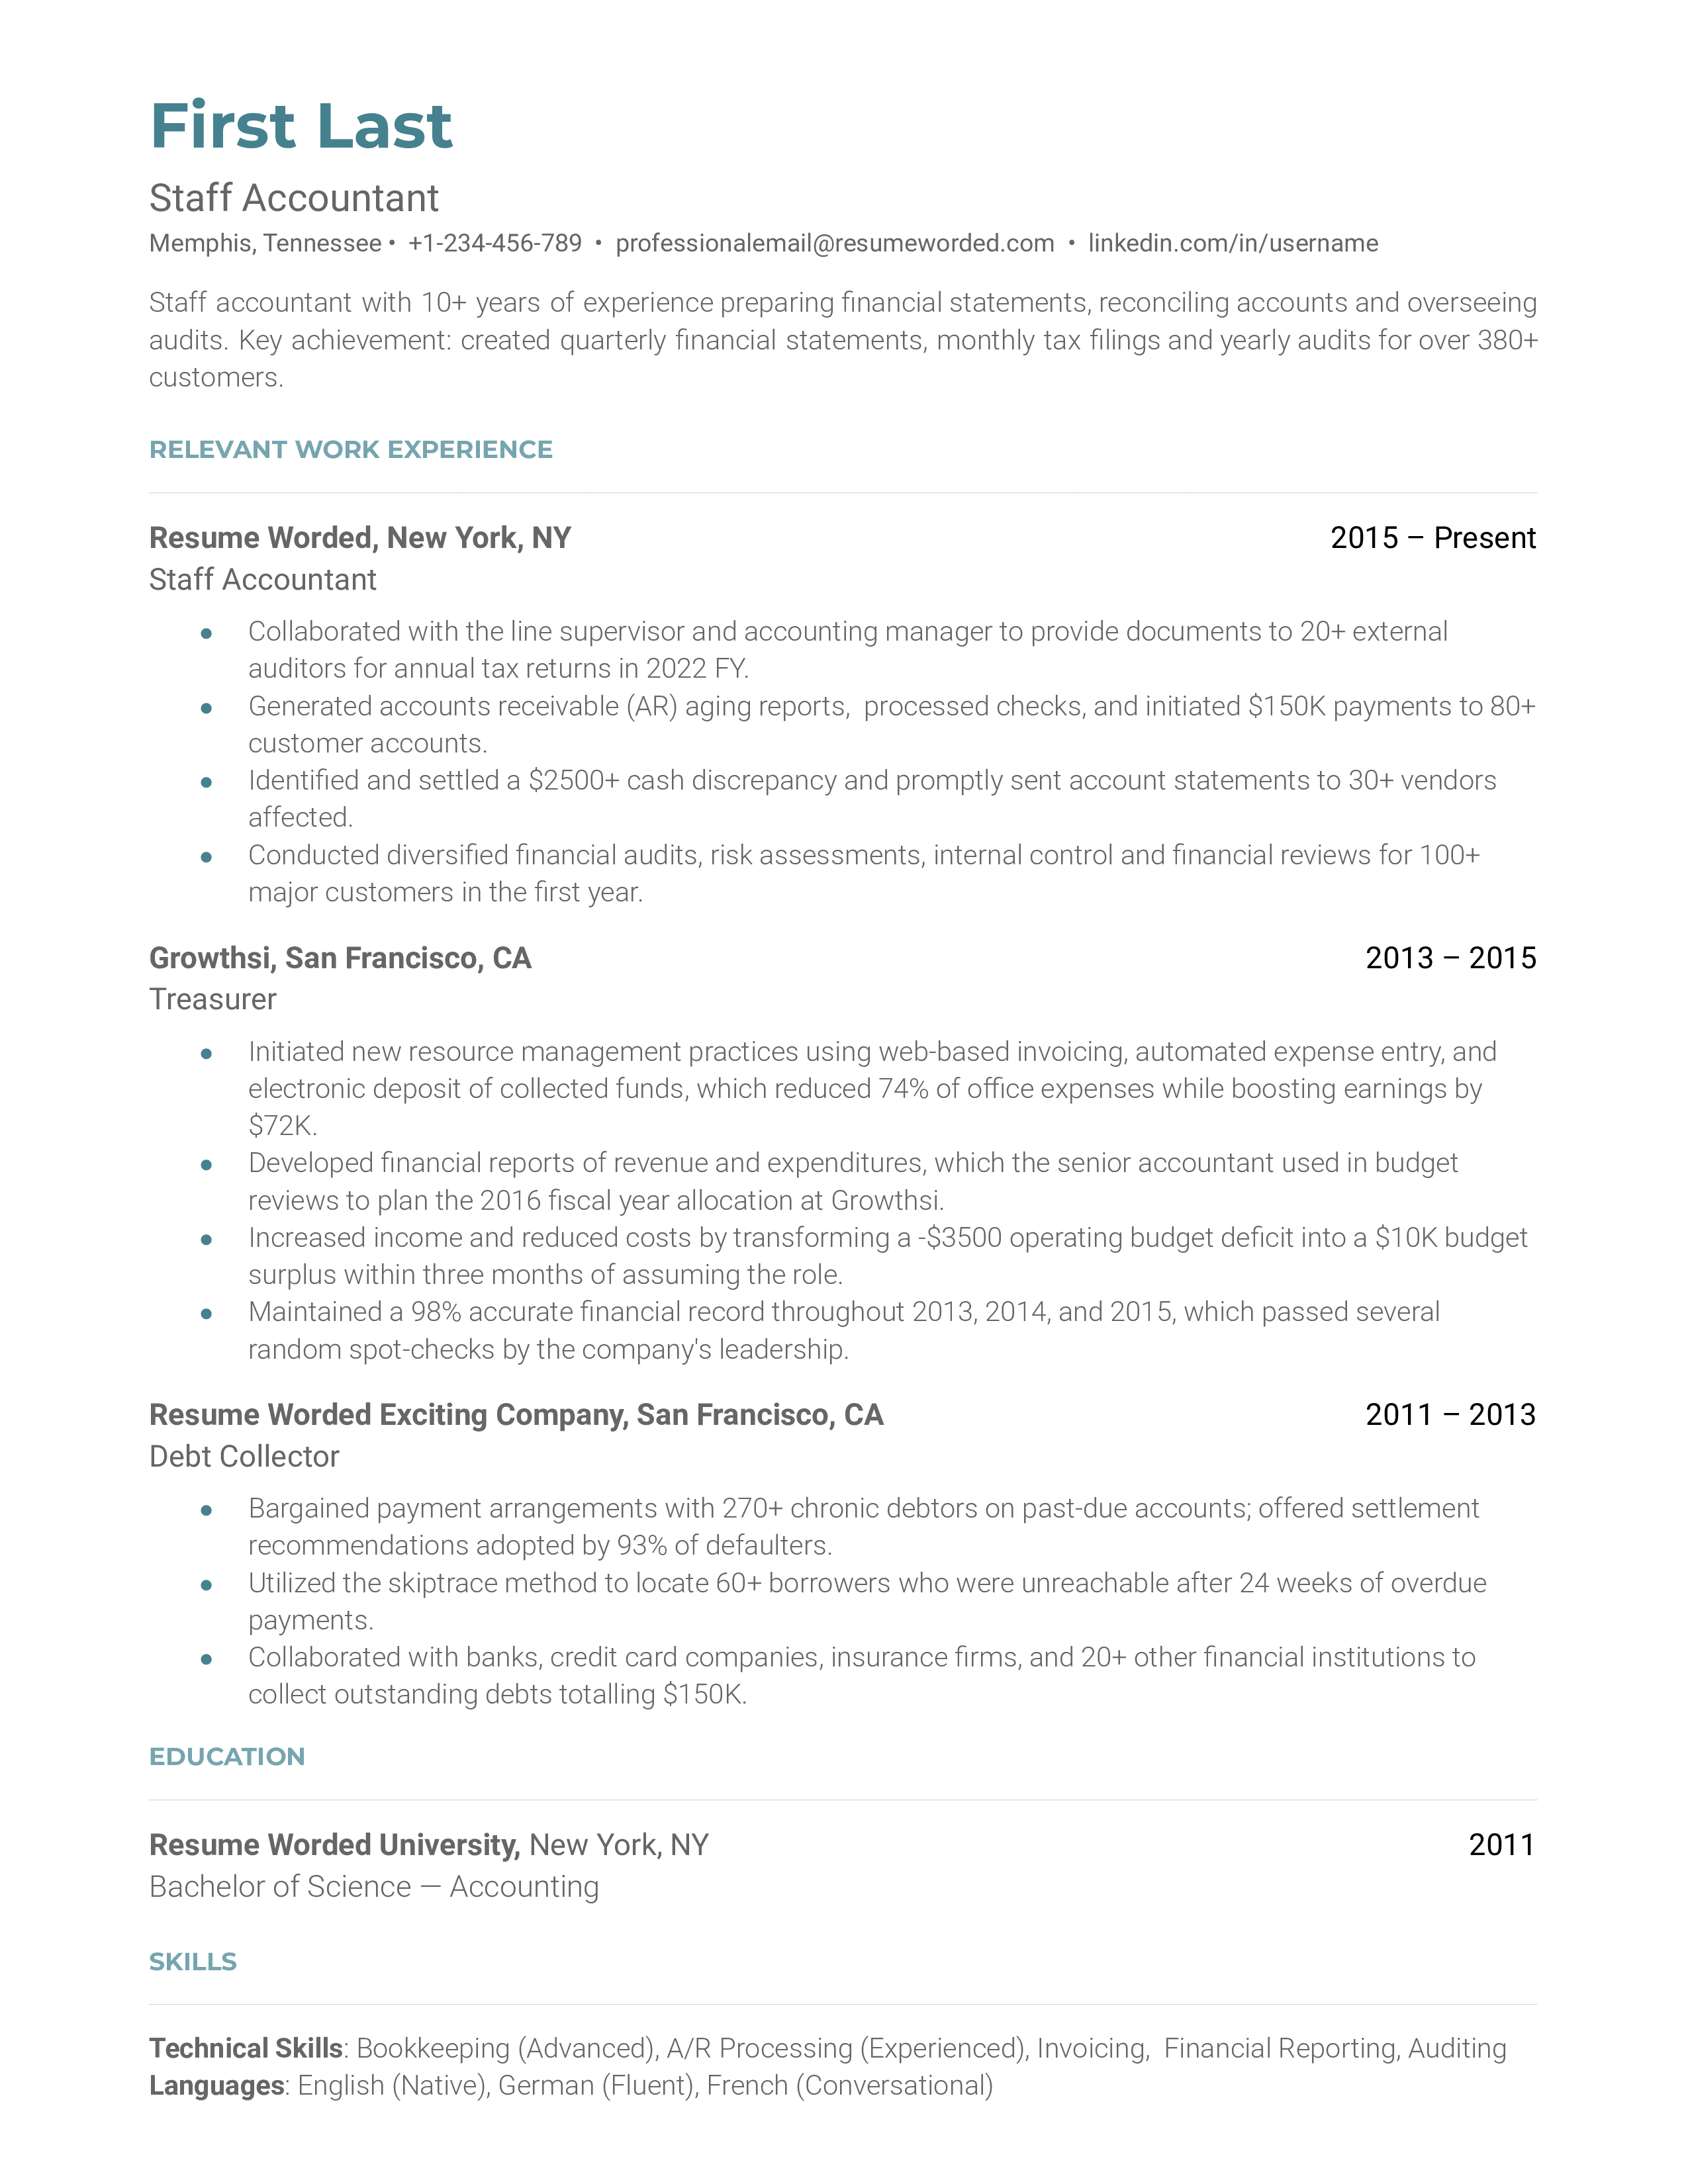 A staff accountant resume template showcasing academic value.